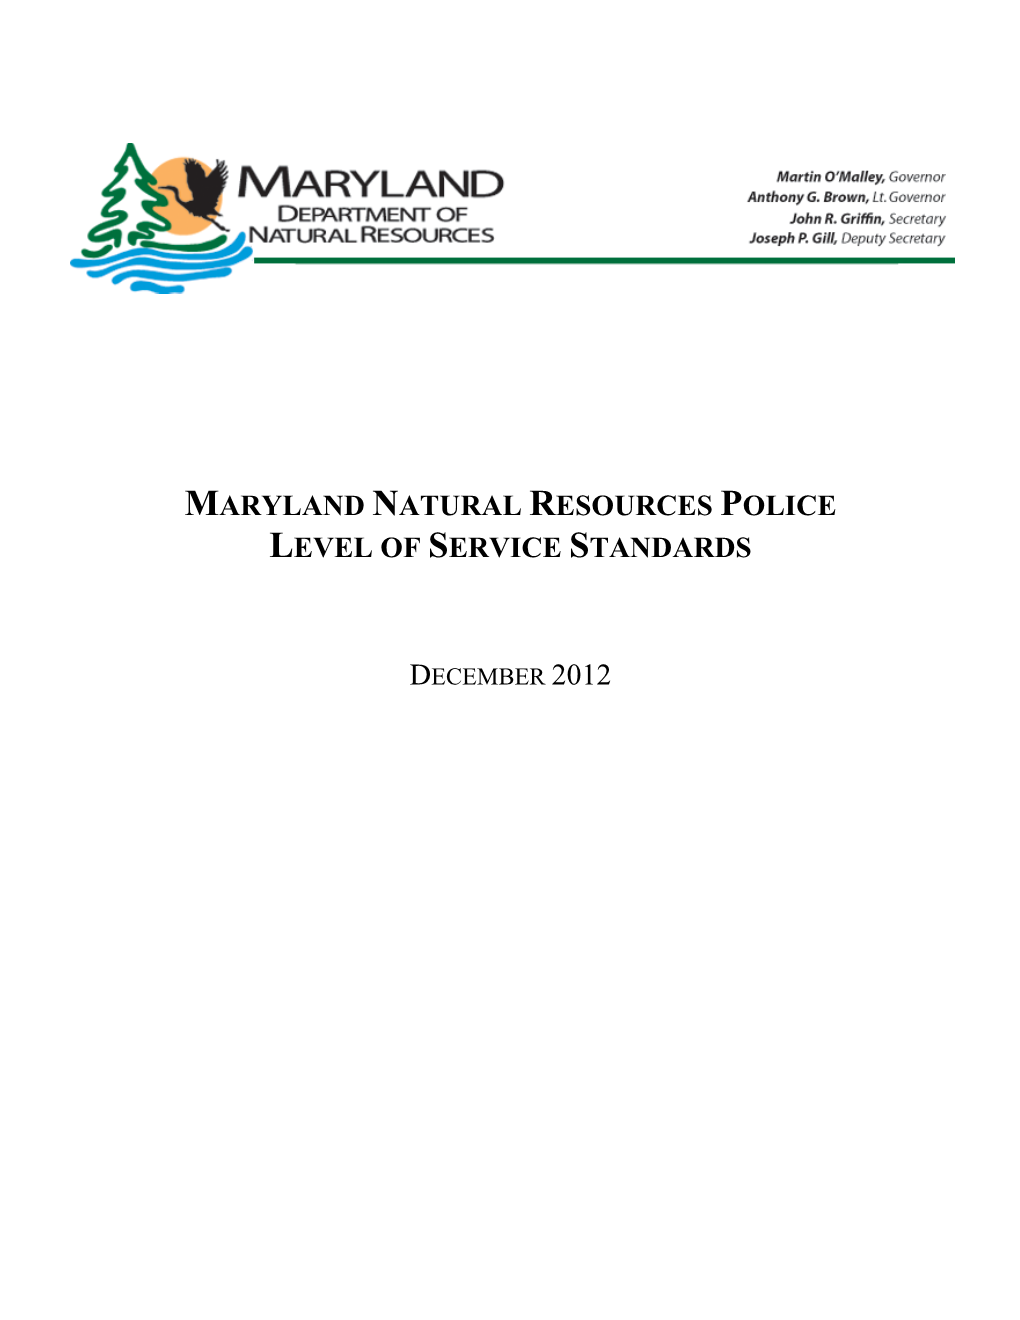 Maryland Natural Resources Police Level of Service Standards